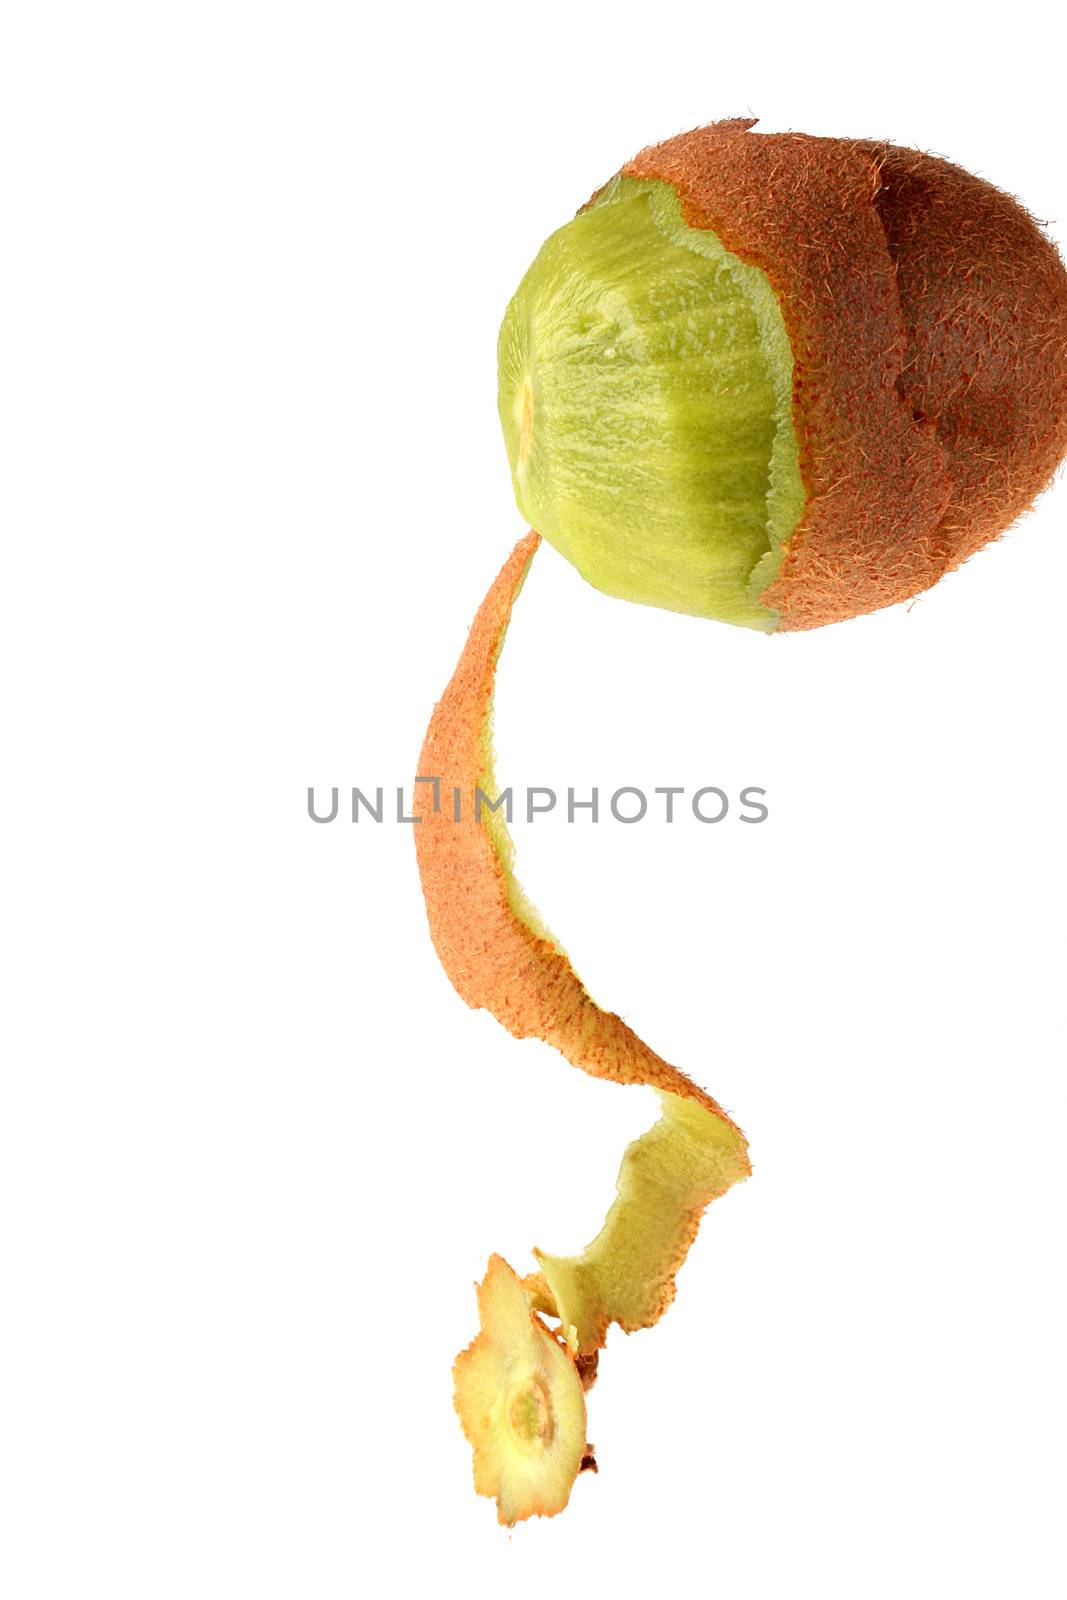 Tropical fruit kiwi in the course of its clearing of a peel.